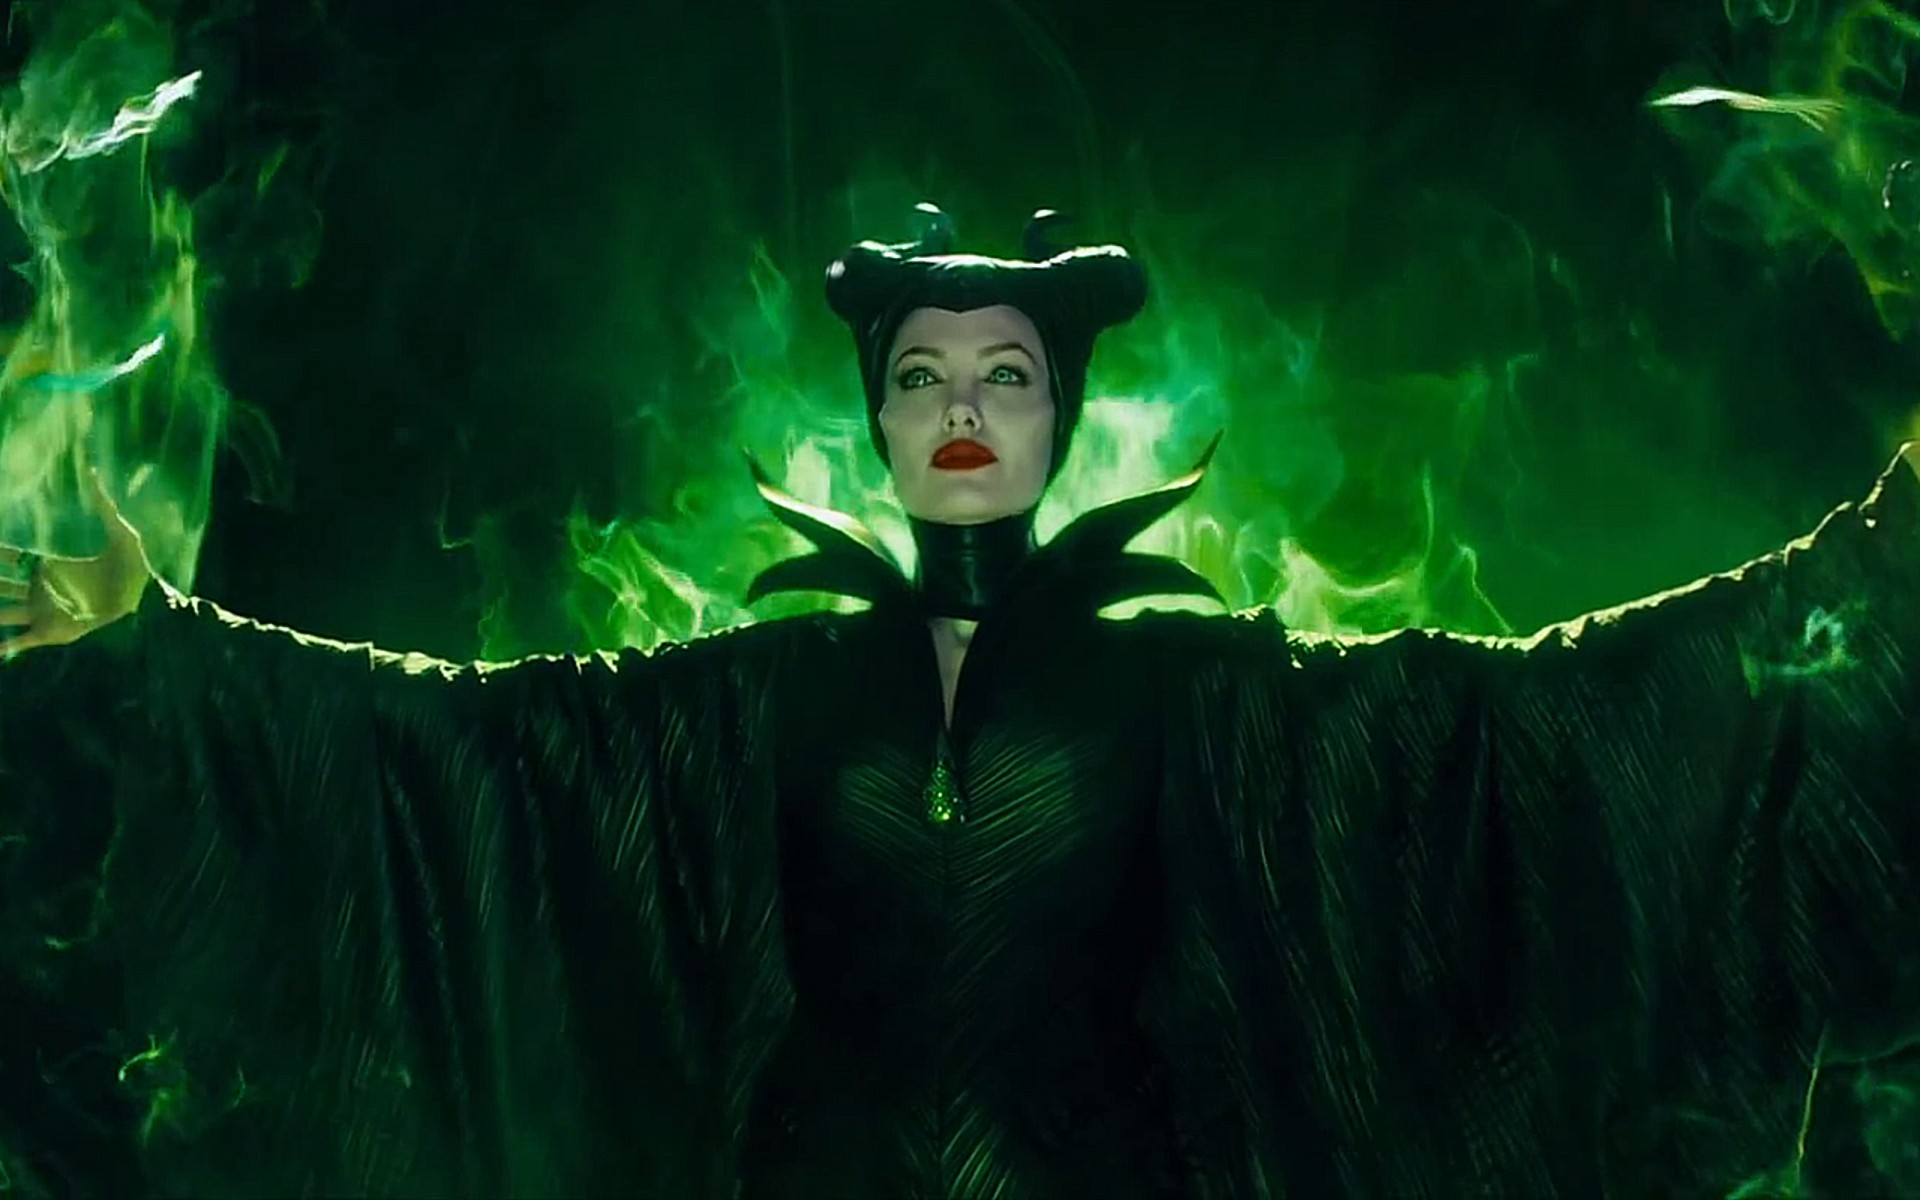 Sleeping Beauty Vs Maleficent Image HD Wallpaper And